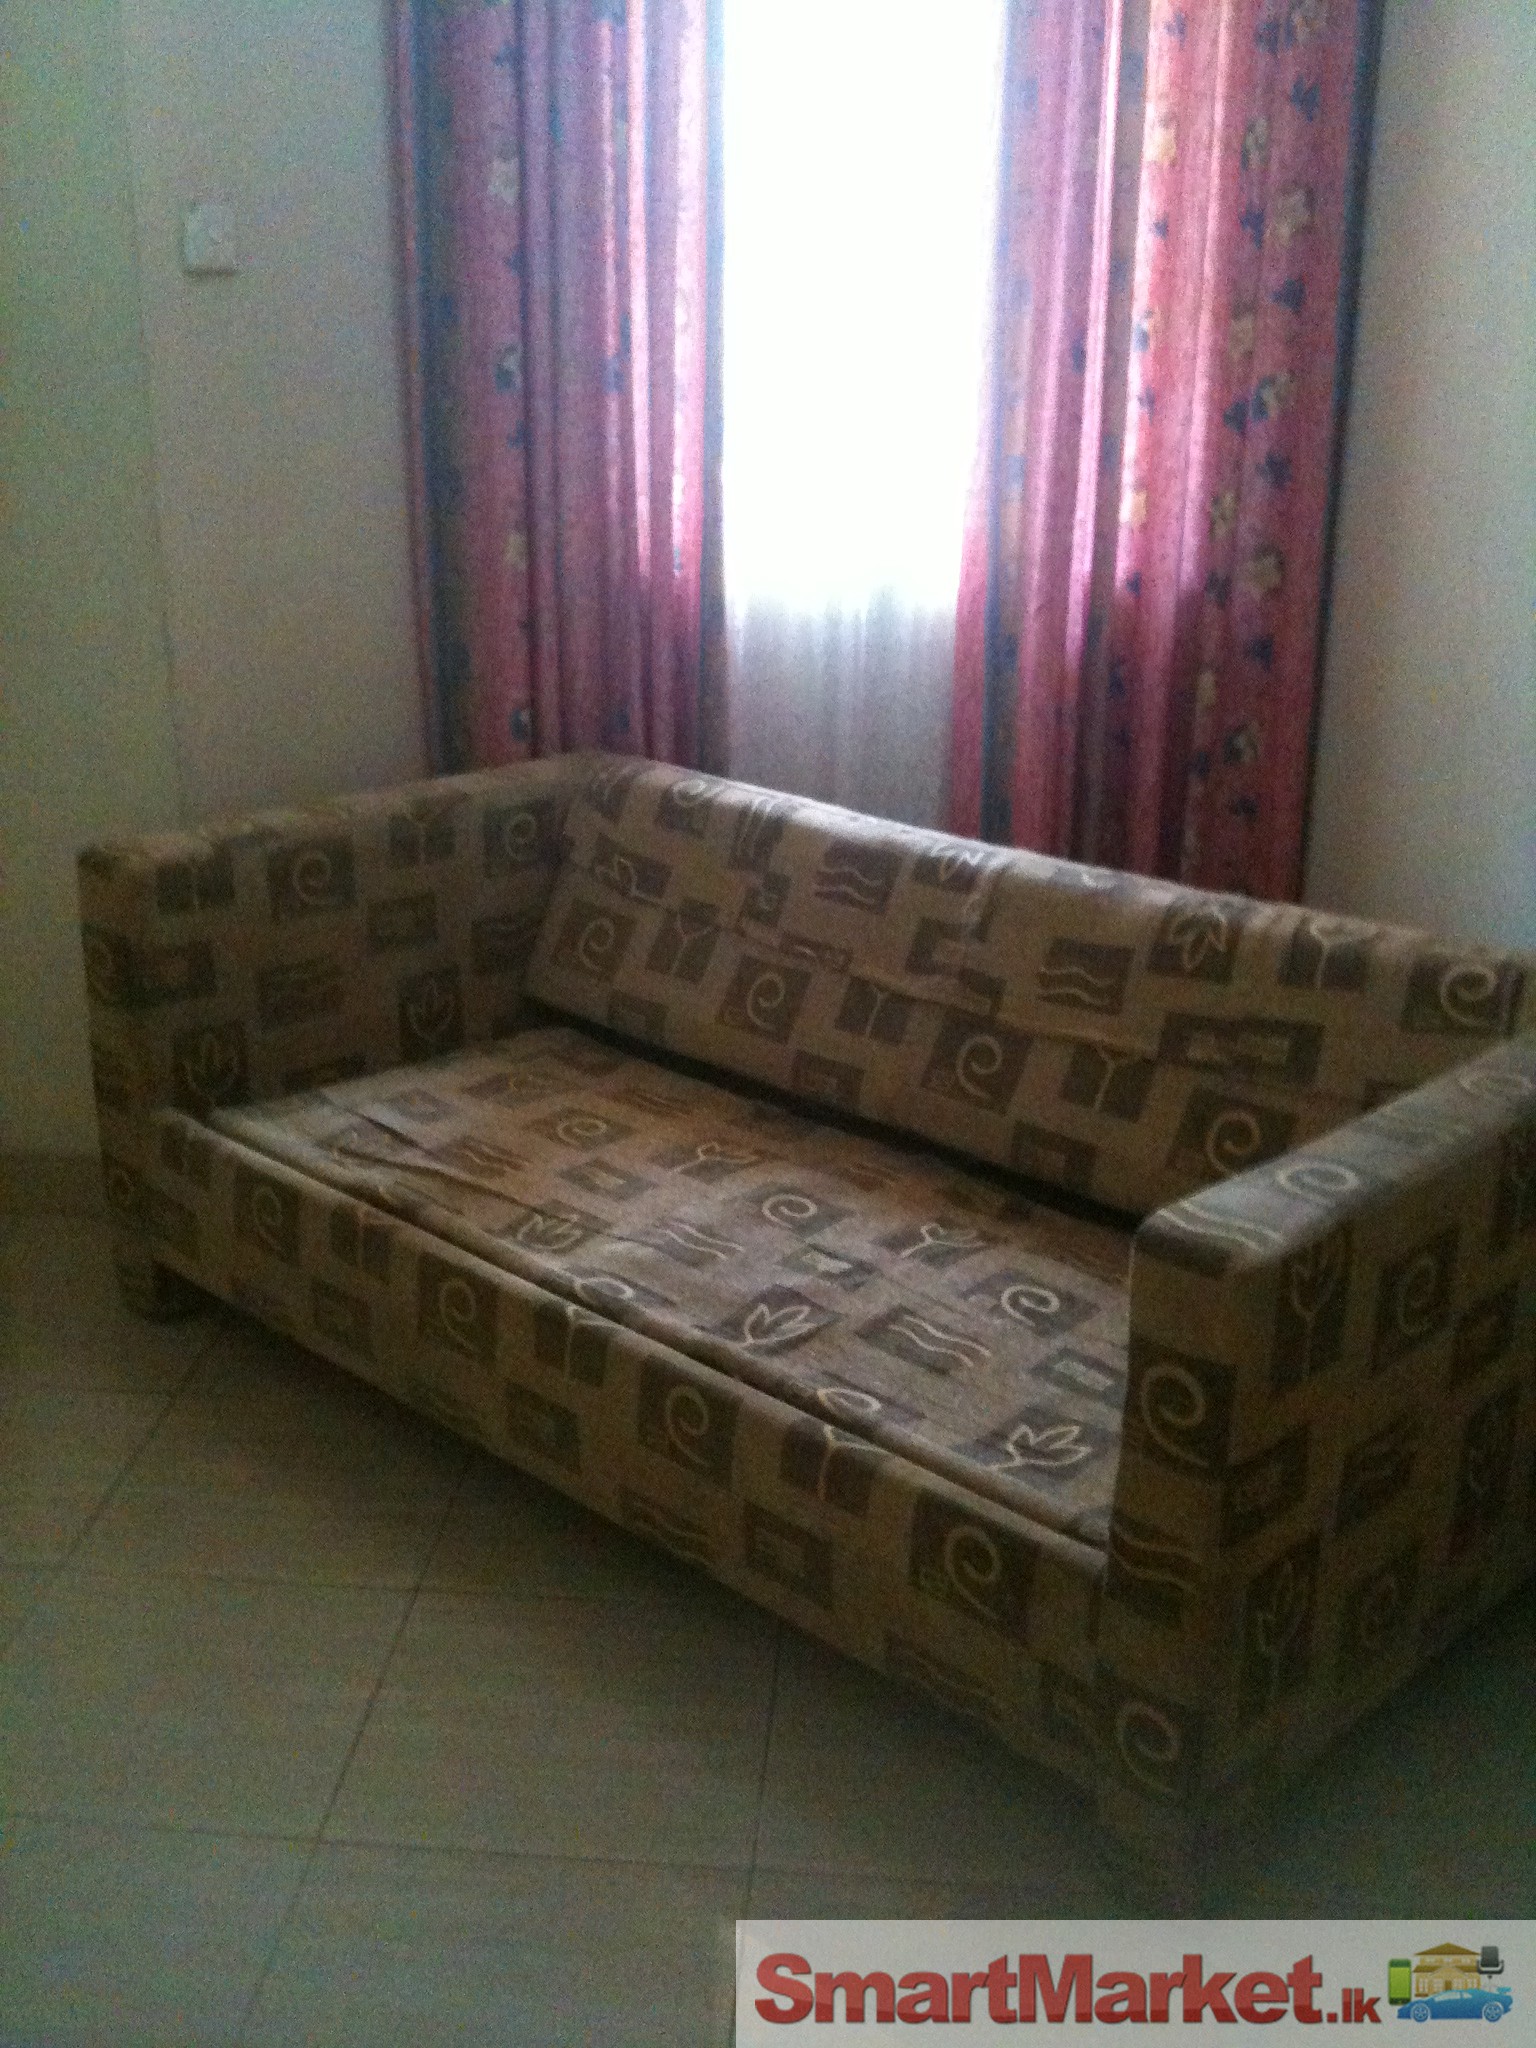 SOFA BED IMPORTED FROM USA